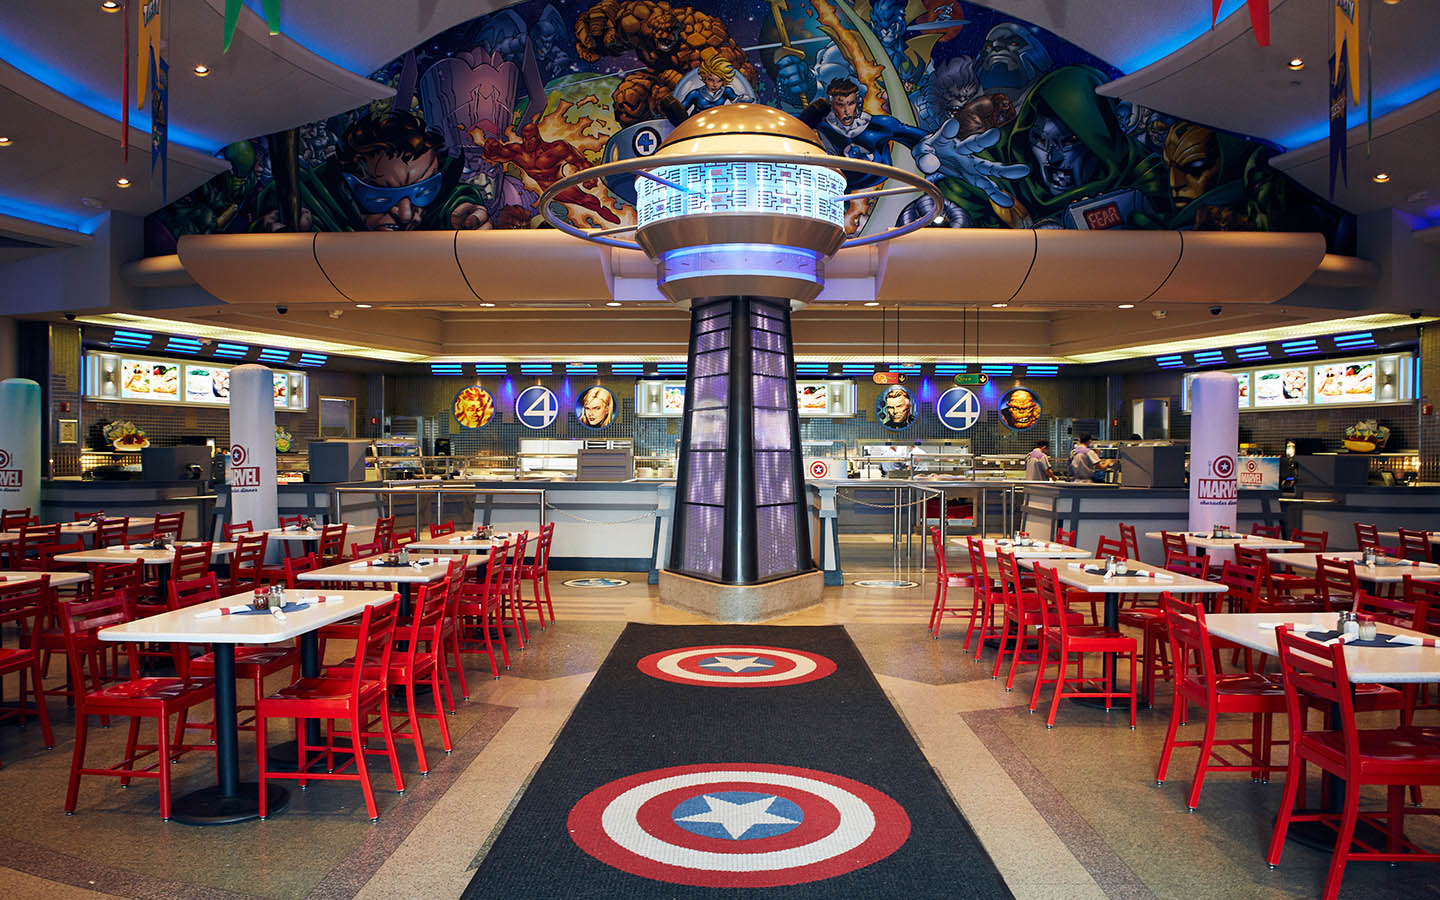 Heroes Assemble at Universal Orlando For a Pretty Super Character Dining Experience!